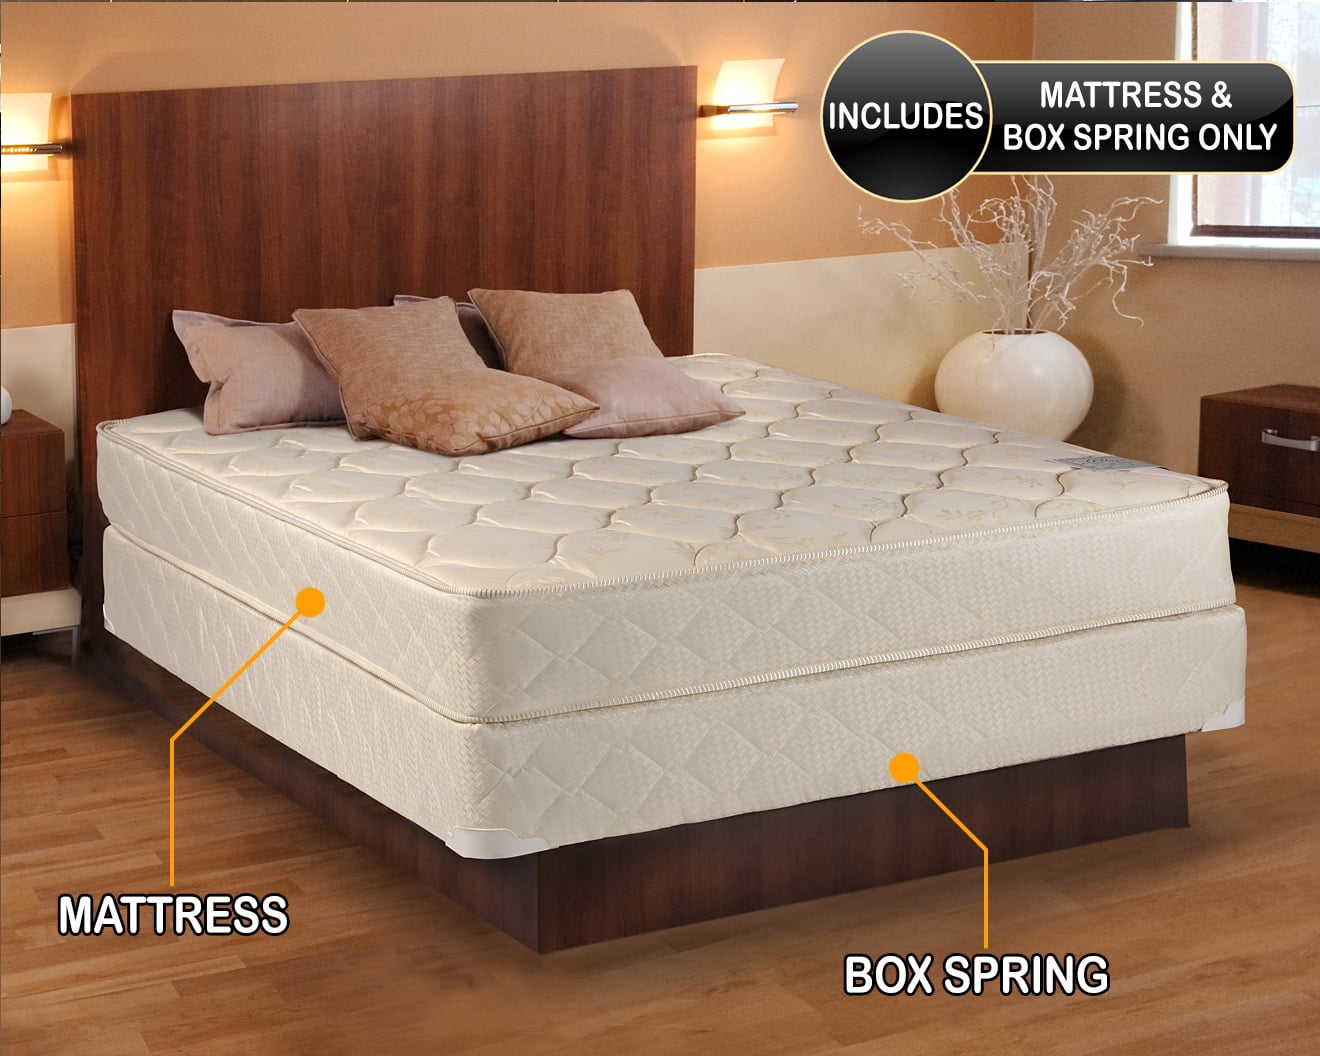 Best Firm Mattress For Your Back (Review & Buying Guide)